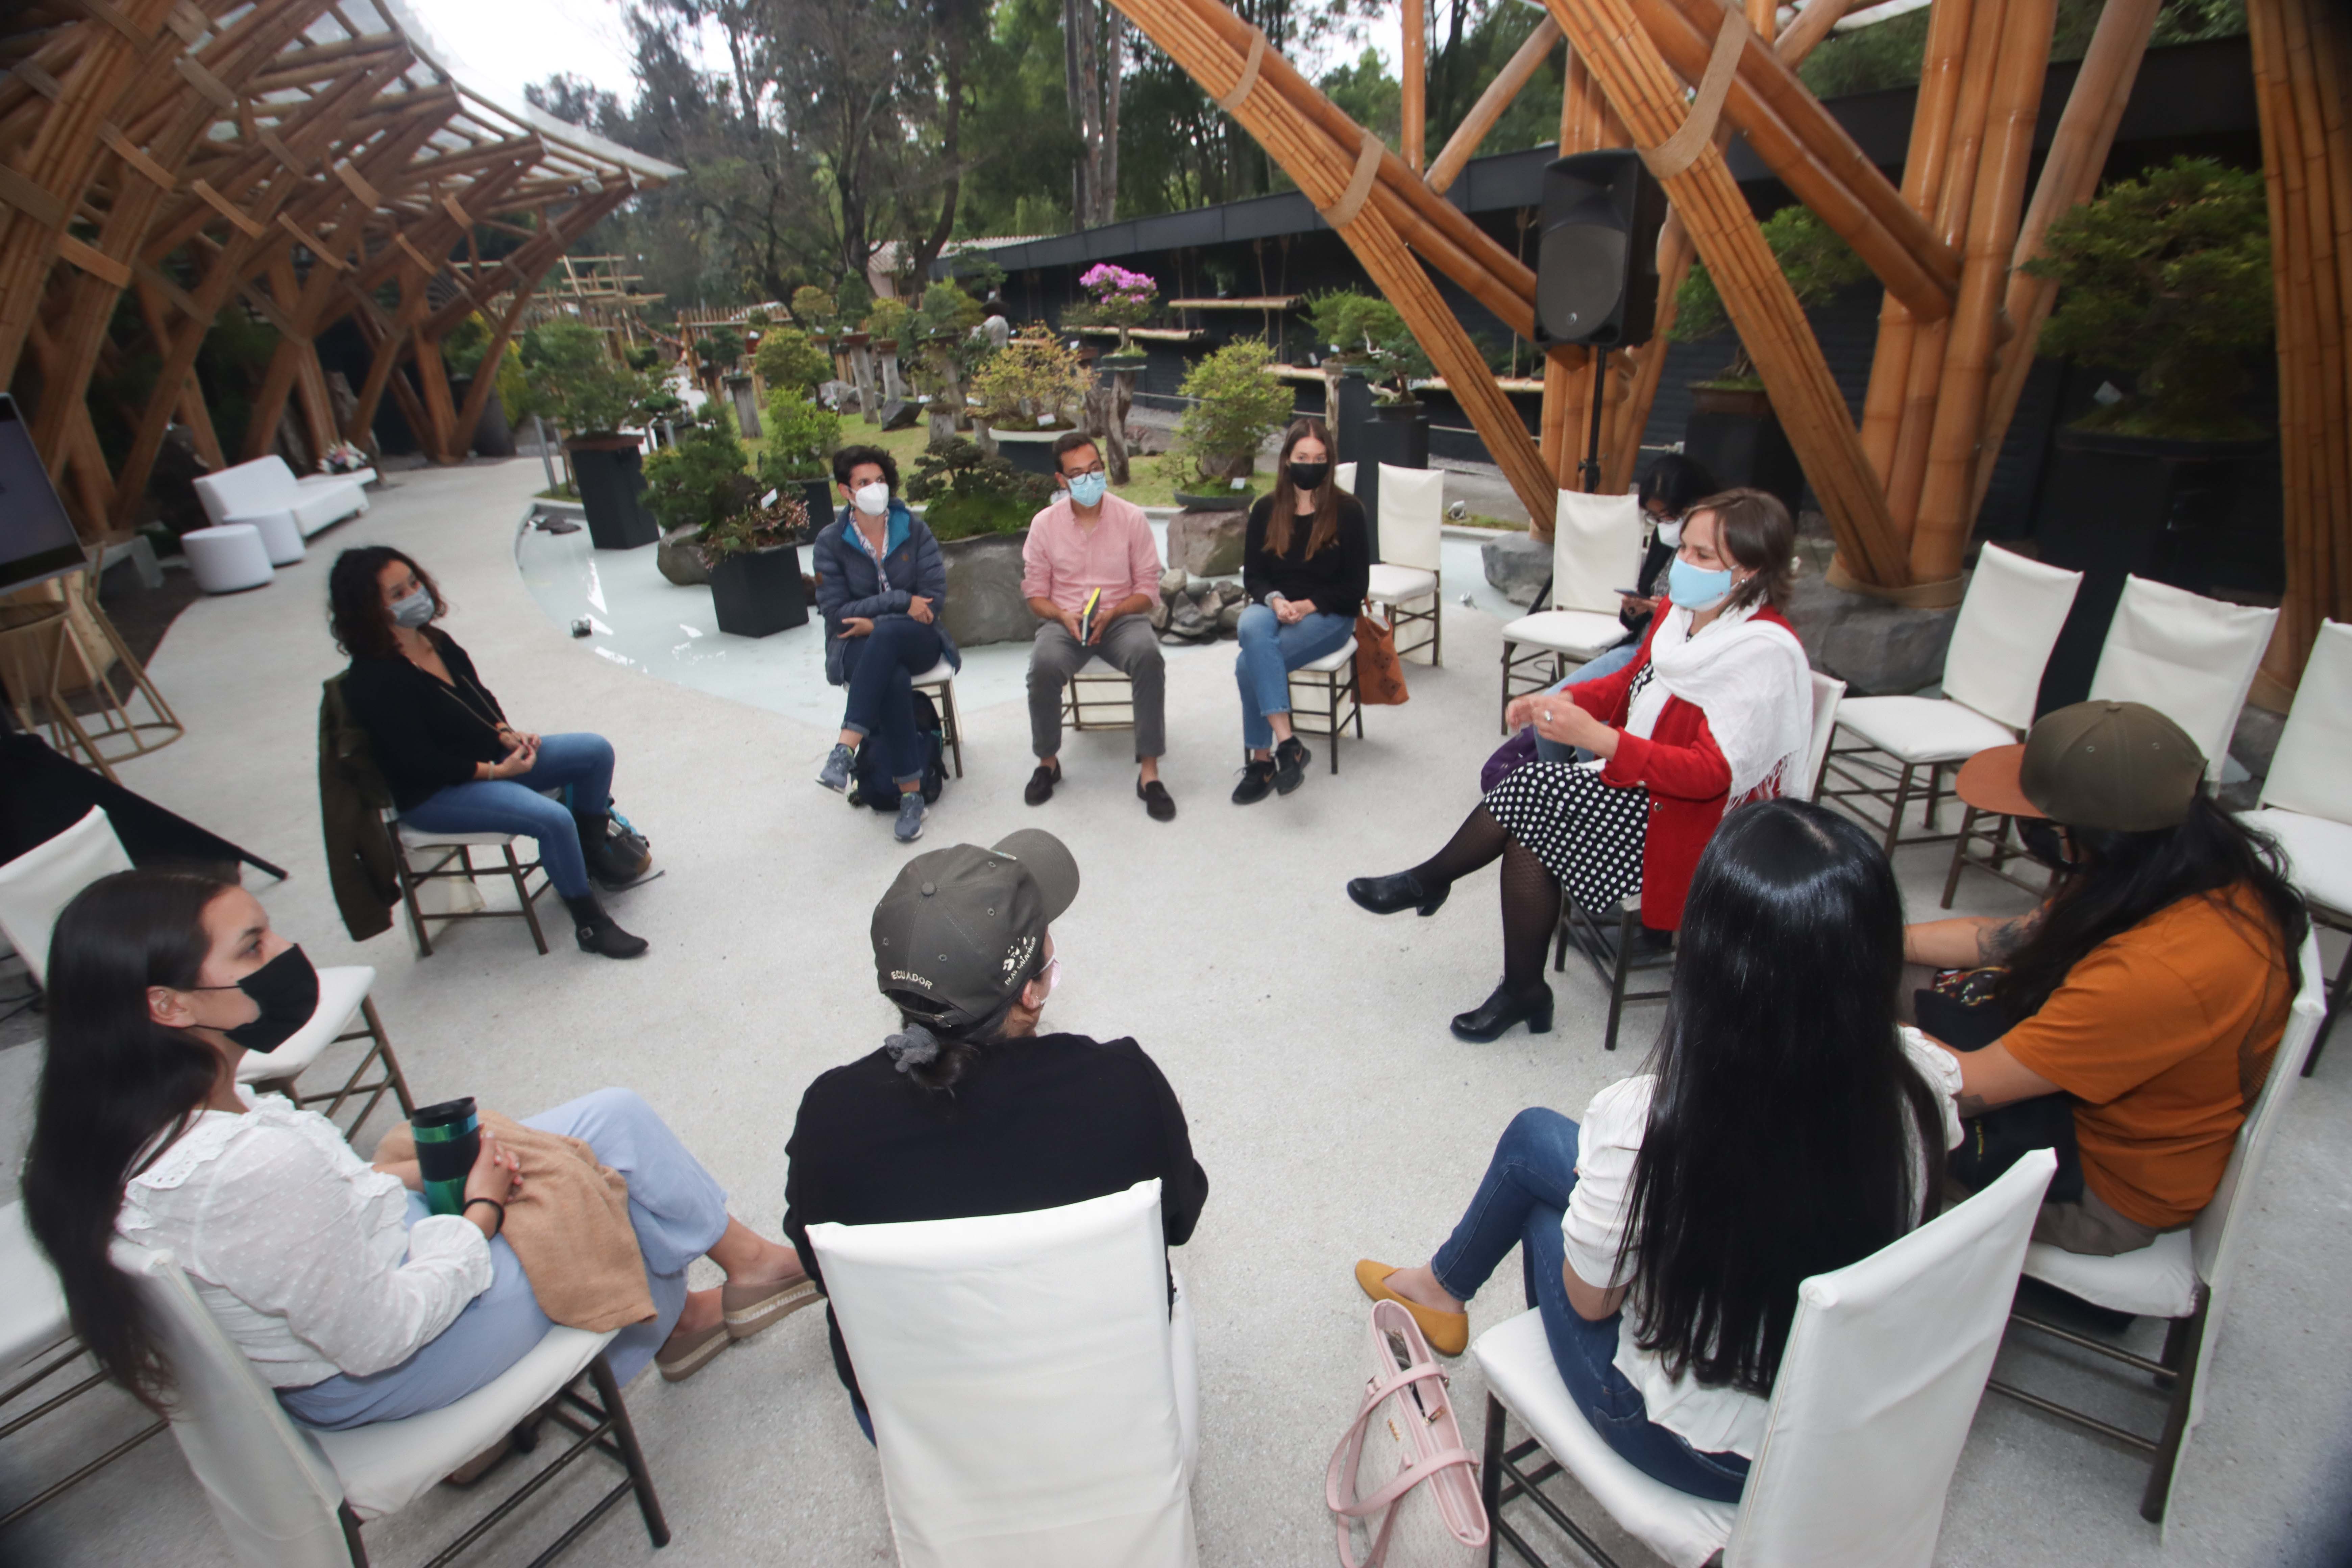 Seated journalists gathered in a circle outdoors